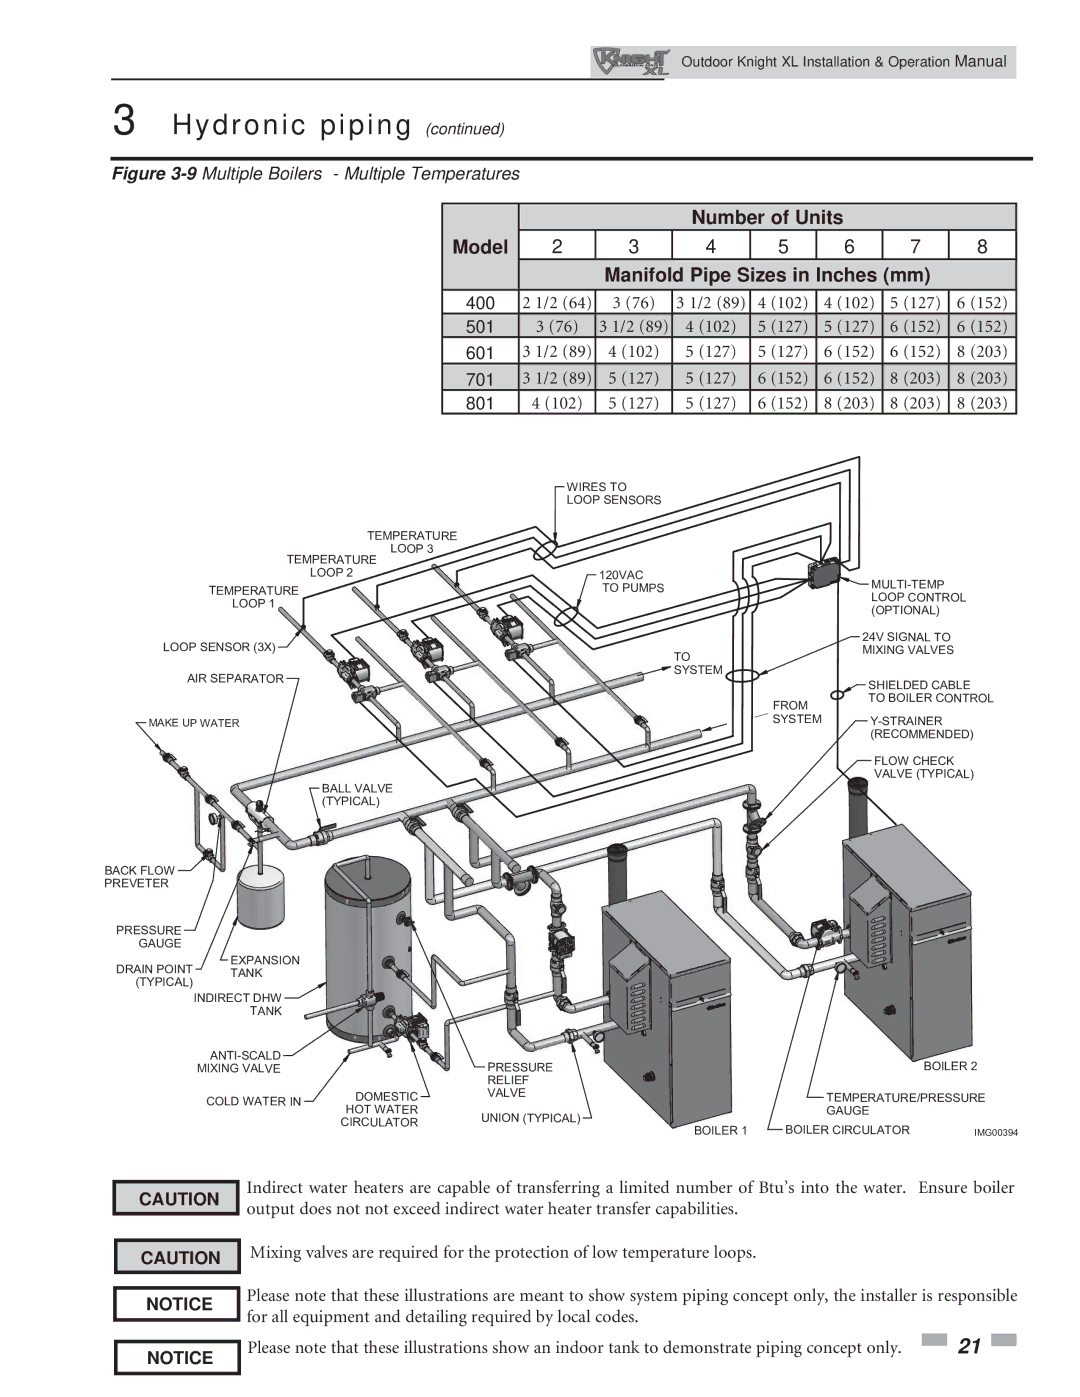 Lochinvar 400-801 operation manual Number of Units, Manifold Pipe Sizes in Inches mm 